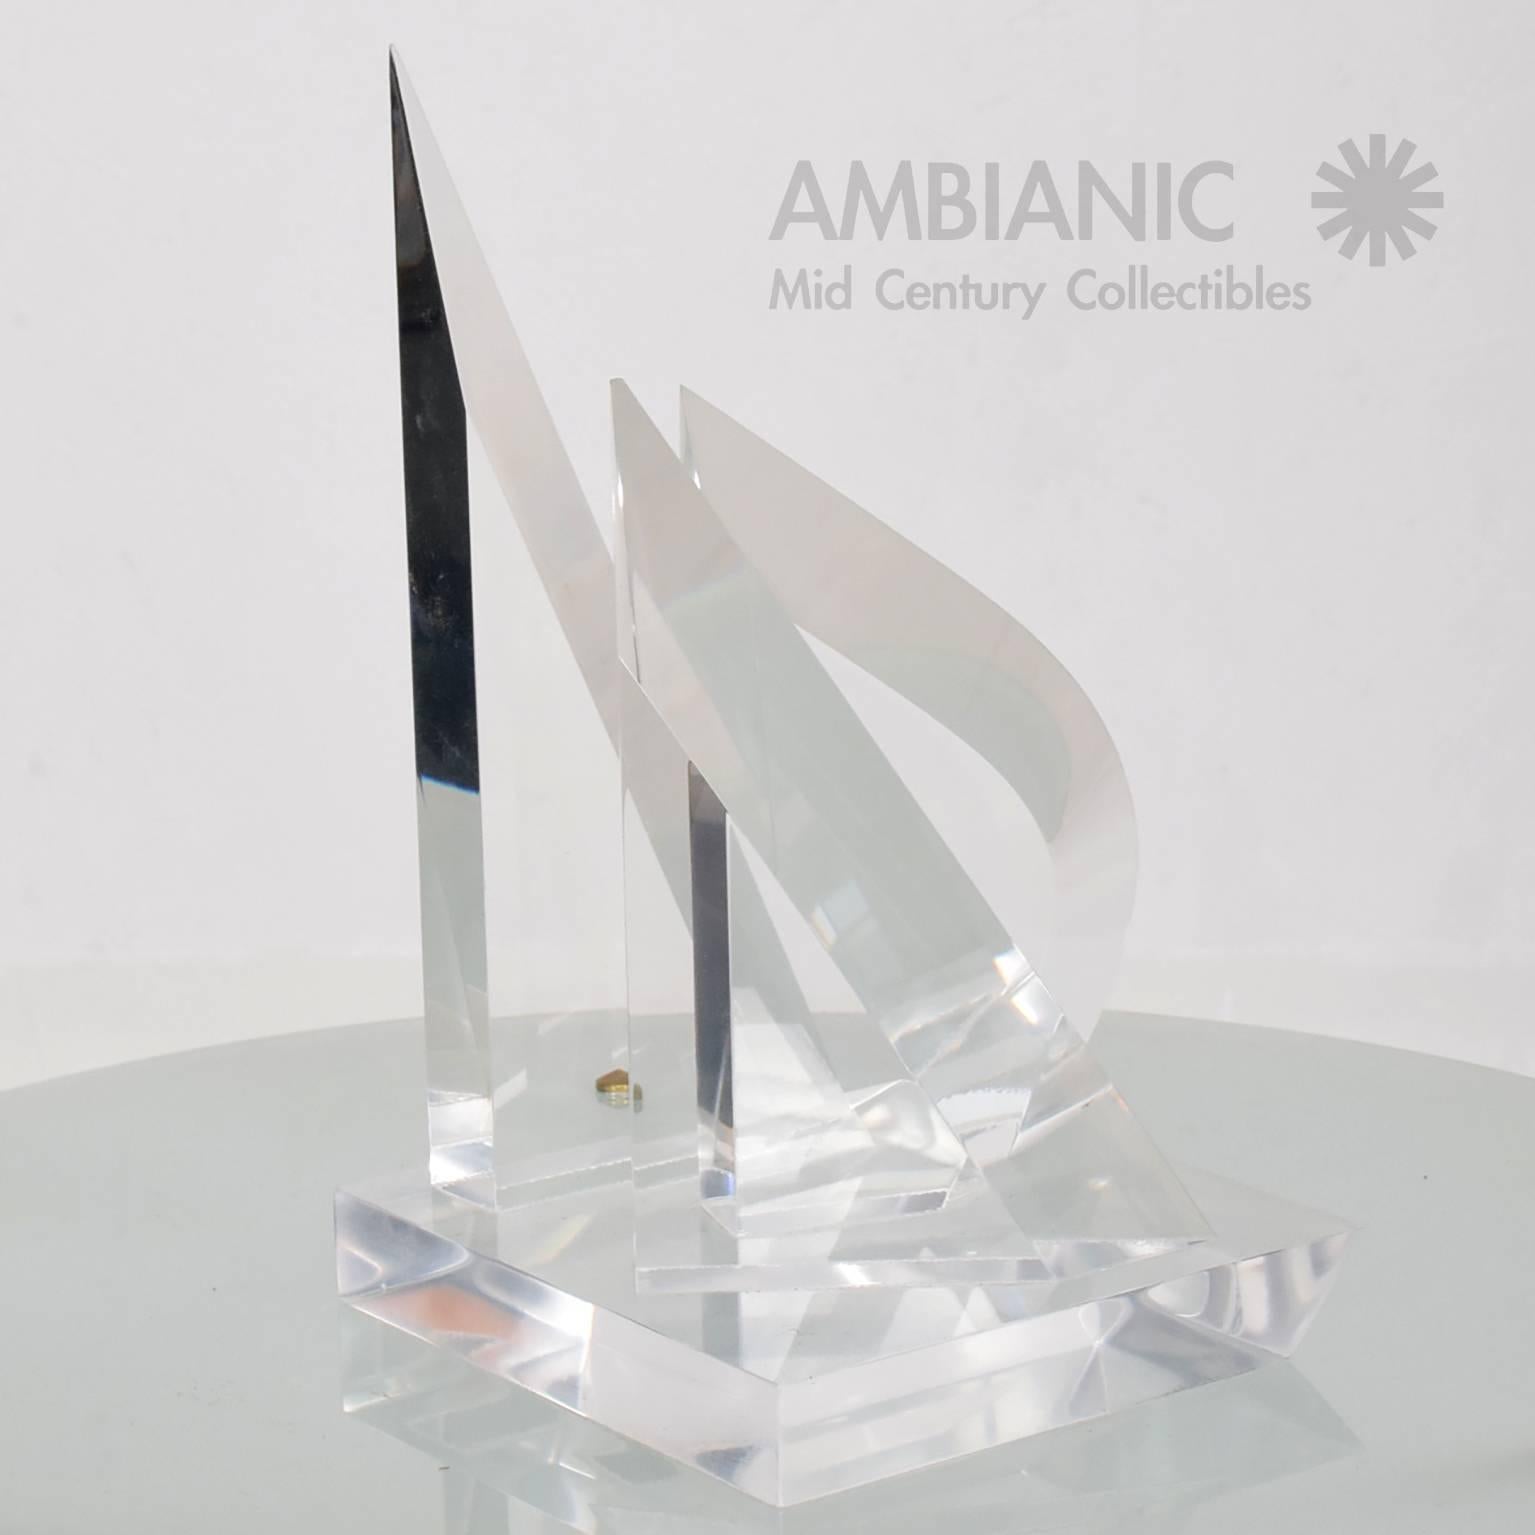 For your consideration a Mid-Century Modern table sculpture made of Lucite of sailing boats. 

Signed.

Measures: 11 1/2